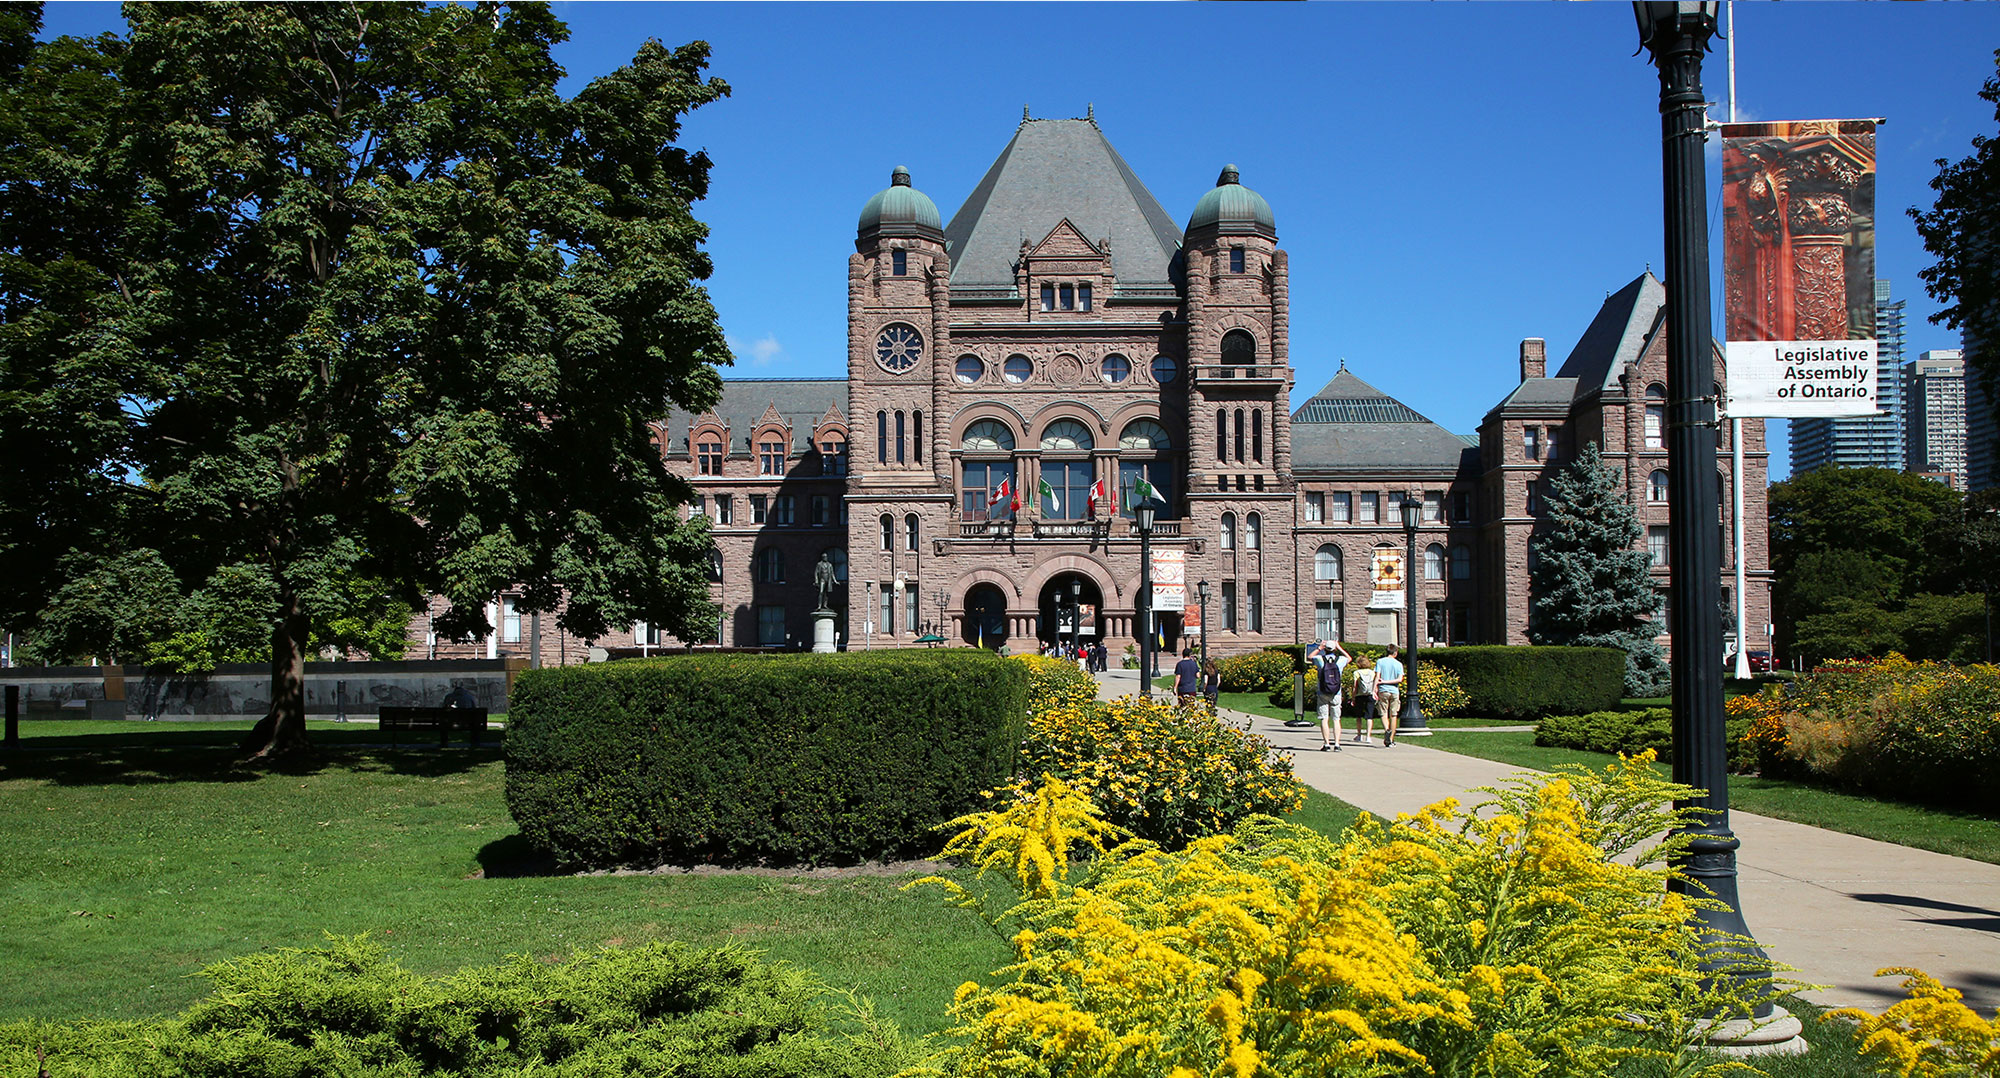 front lawn of Legislative Assembly with trees and buildings in background